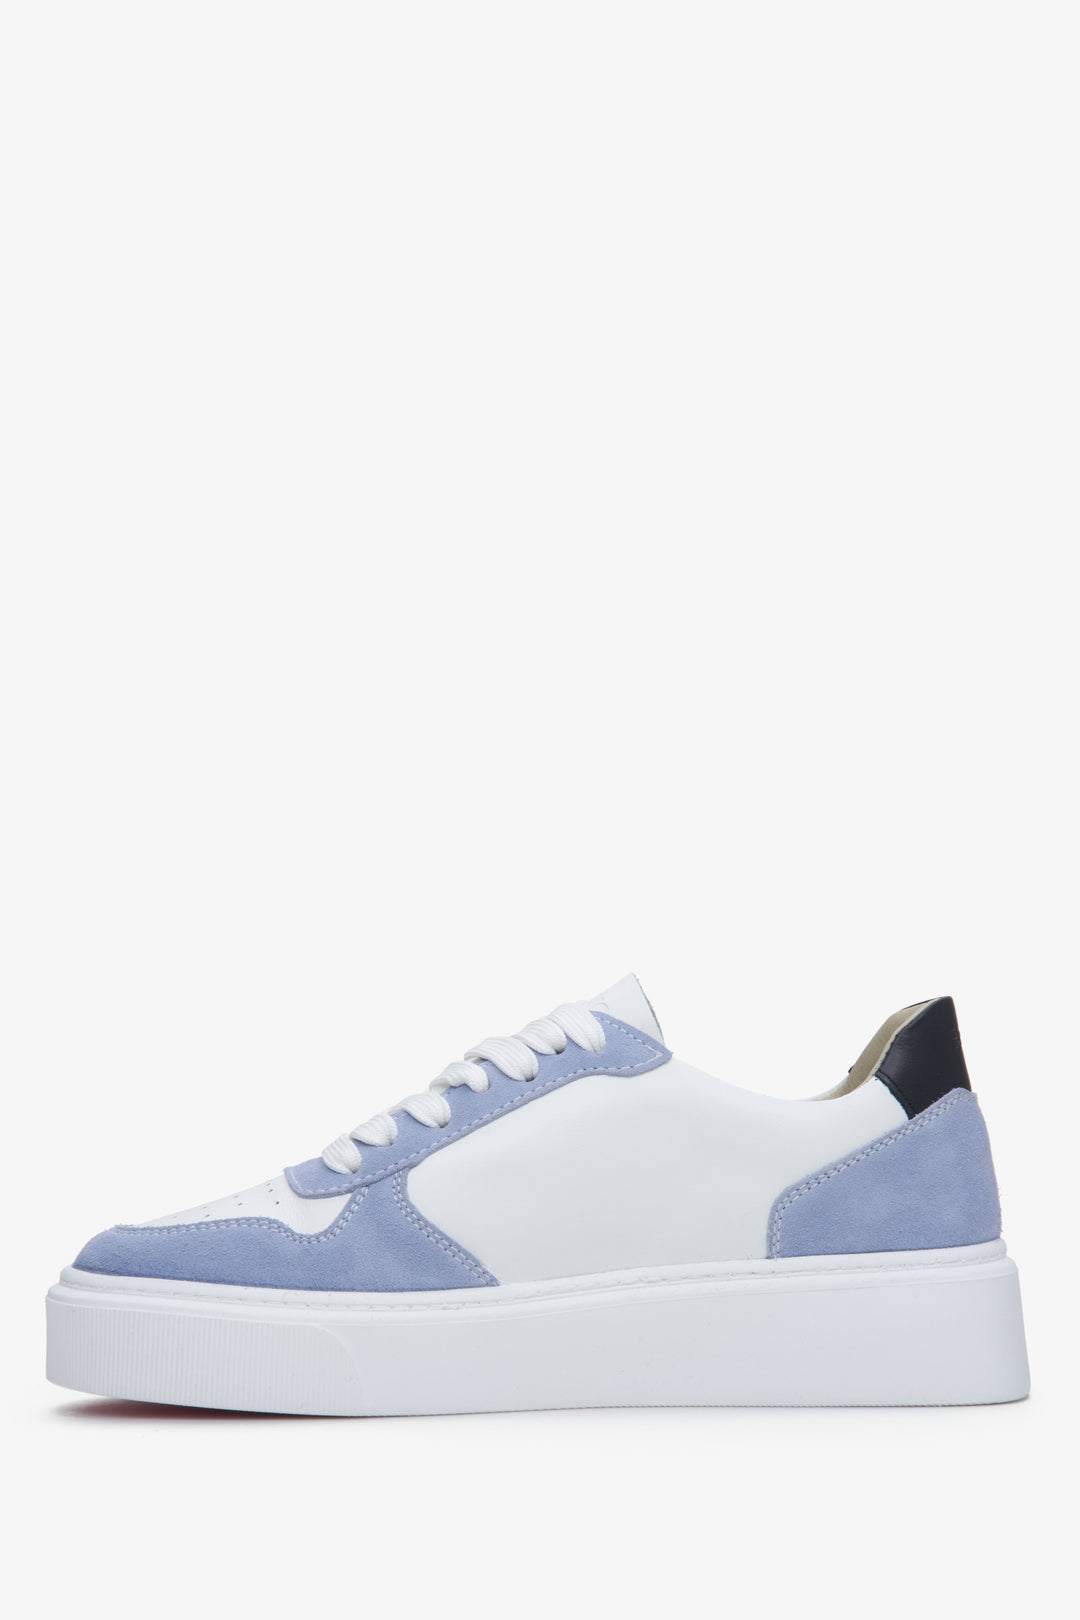 Blue and white leather and natural velvet women's sneakers.